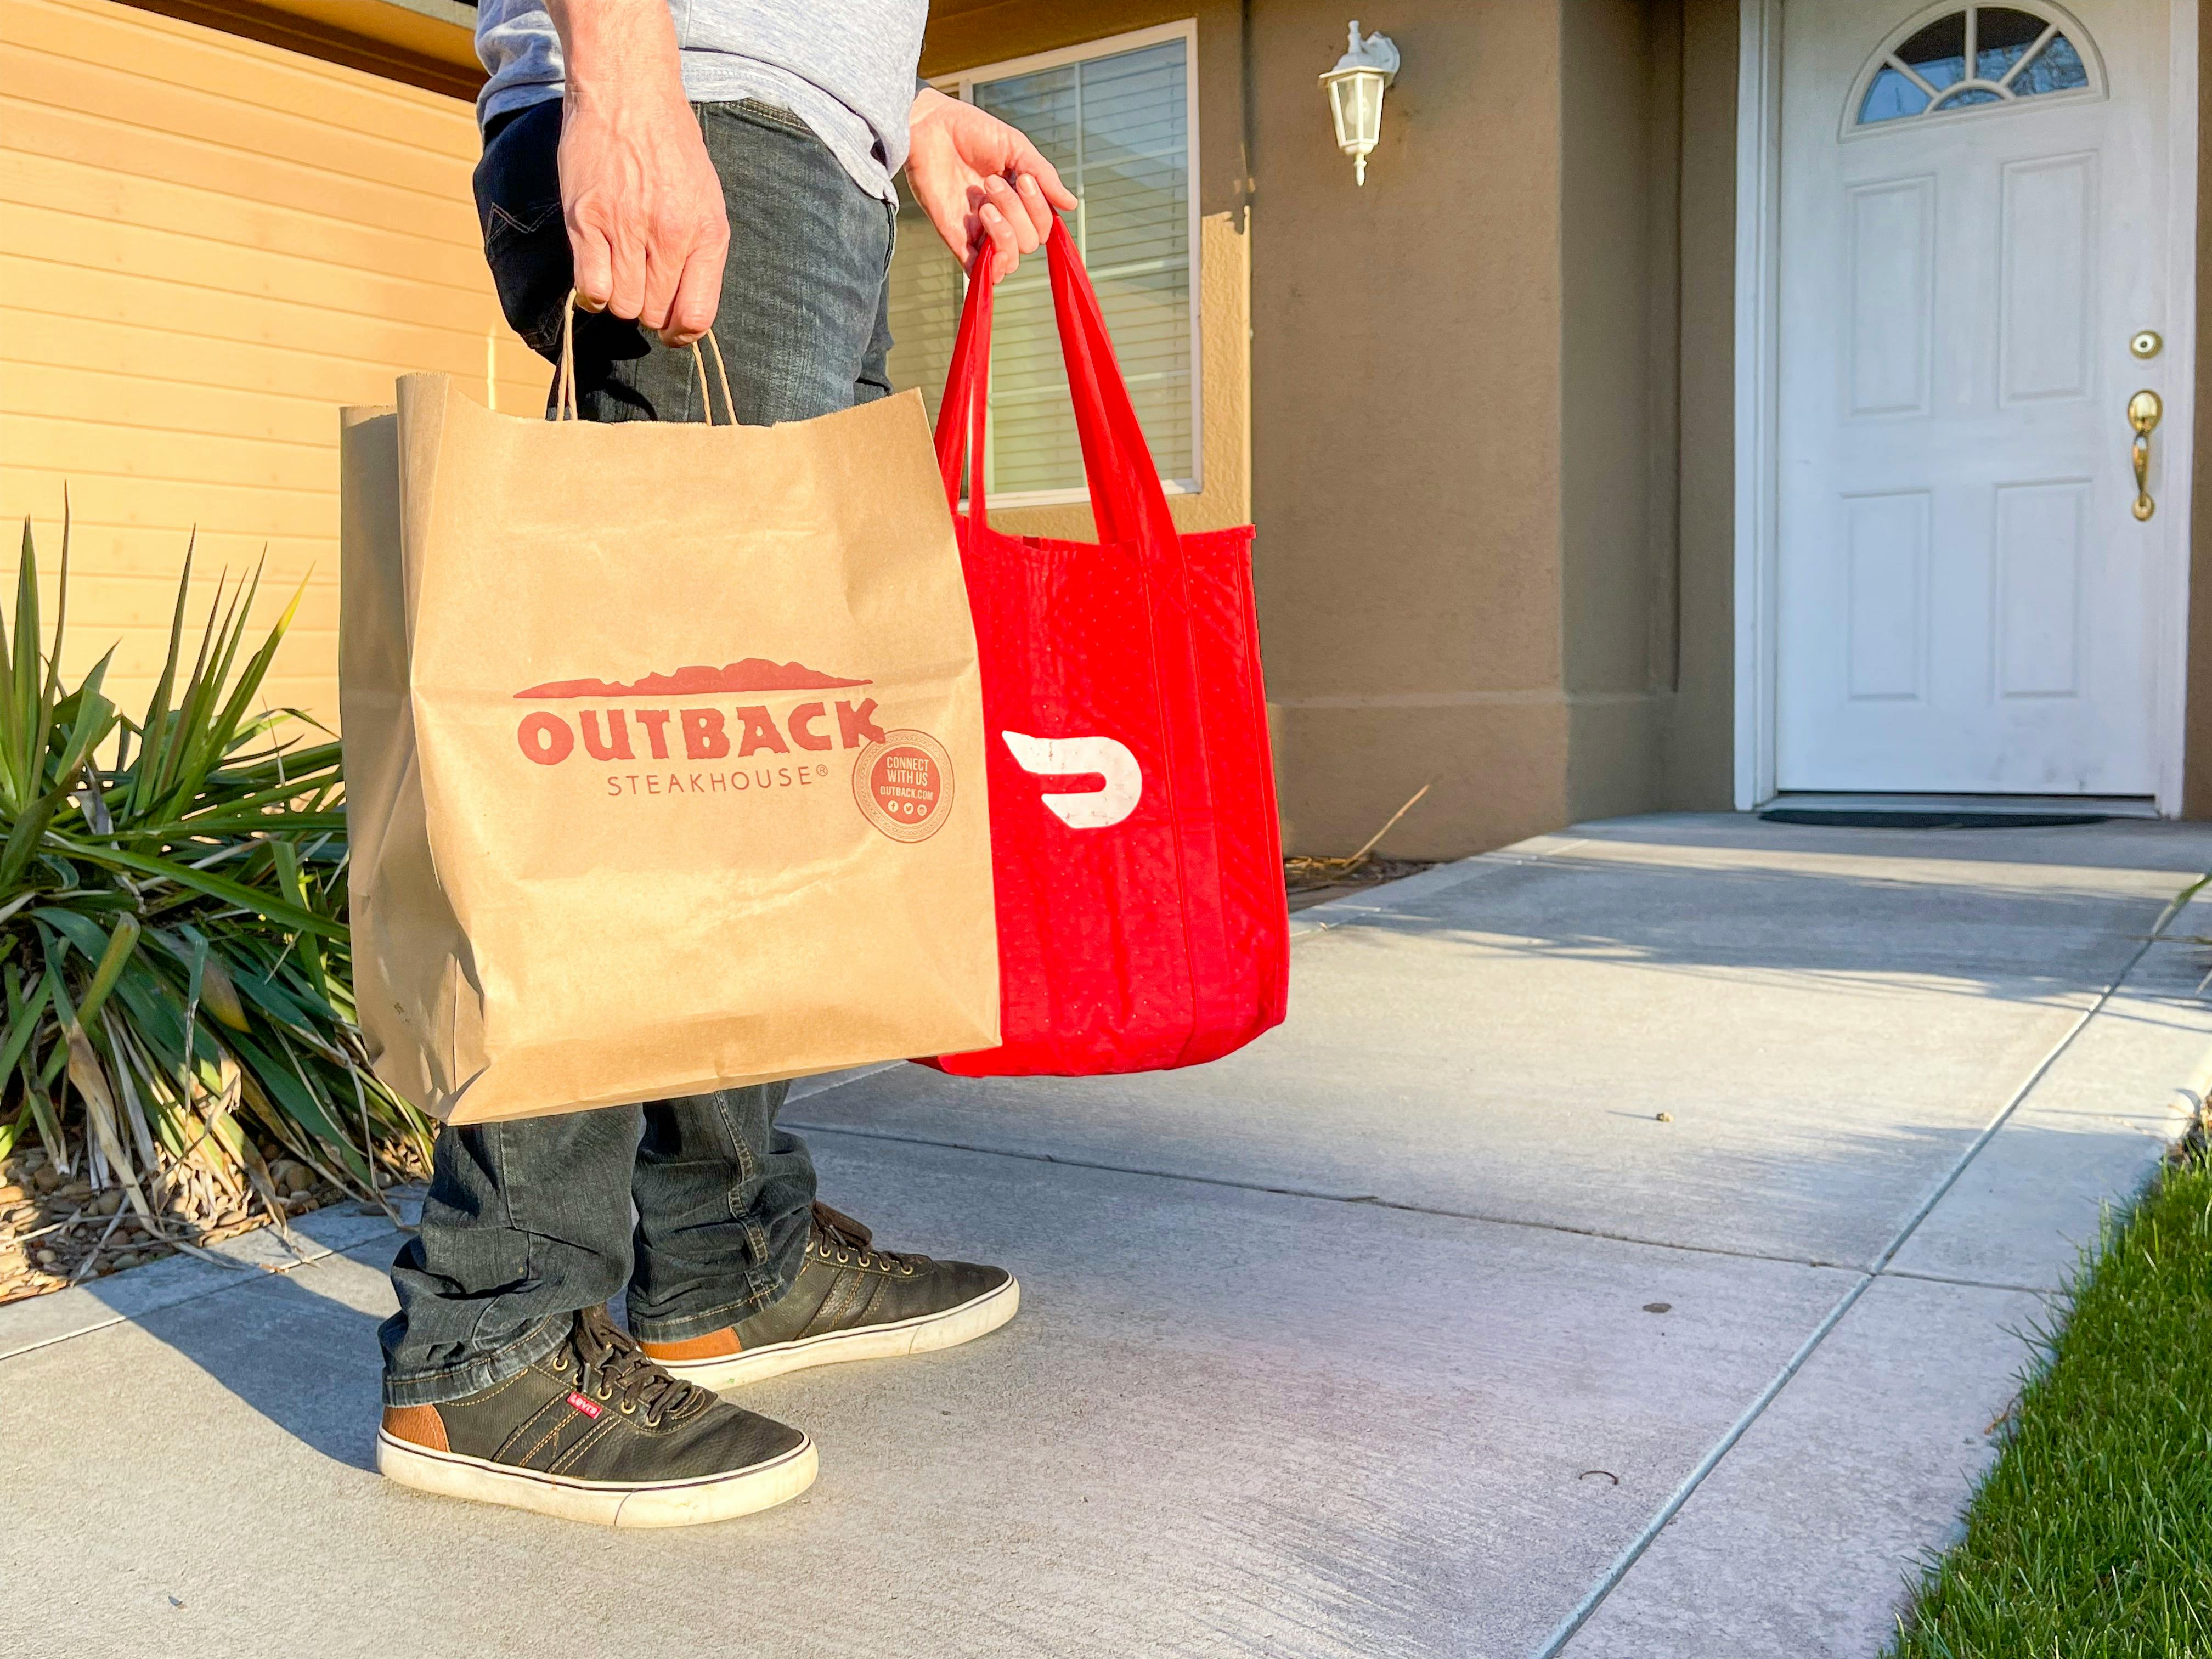 a DoorDash driver holding multiple delivery bags and walking up to the front door of a house